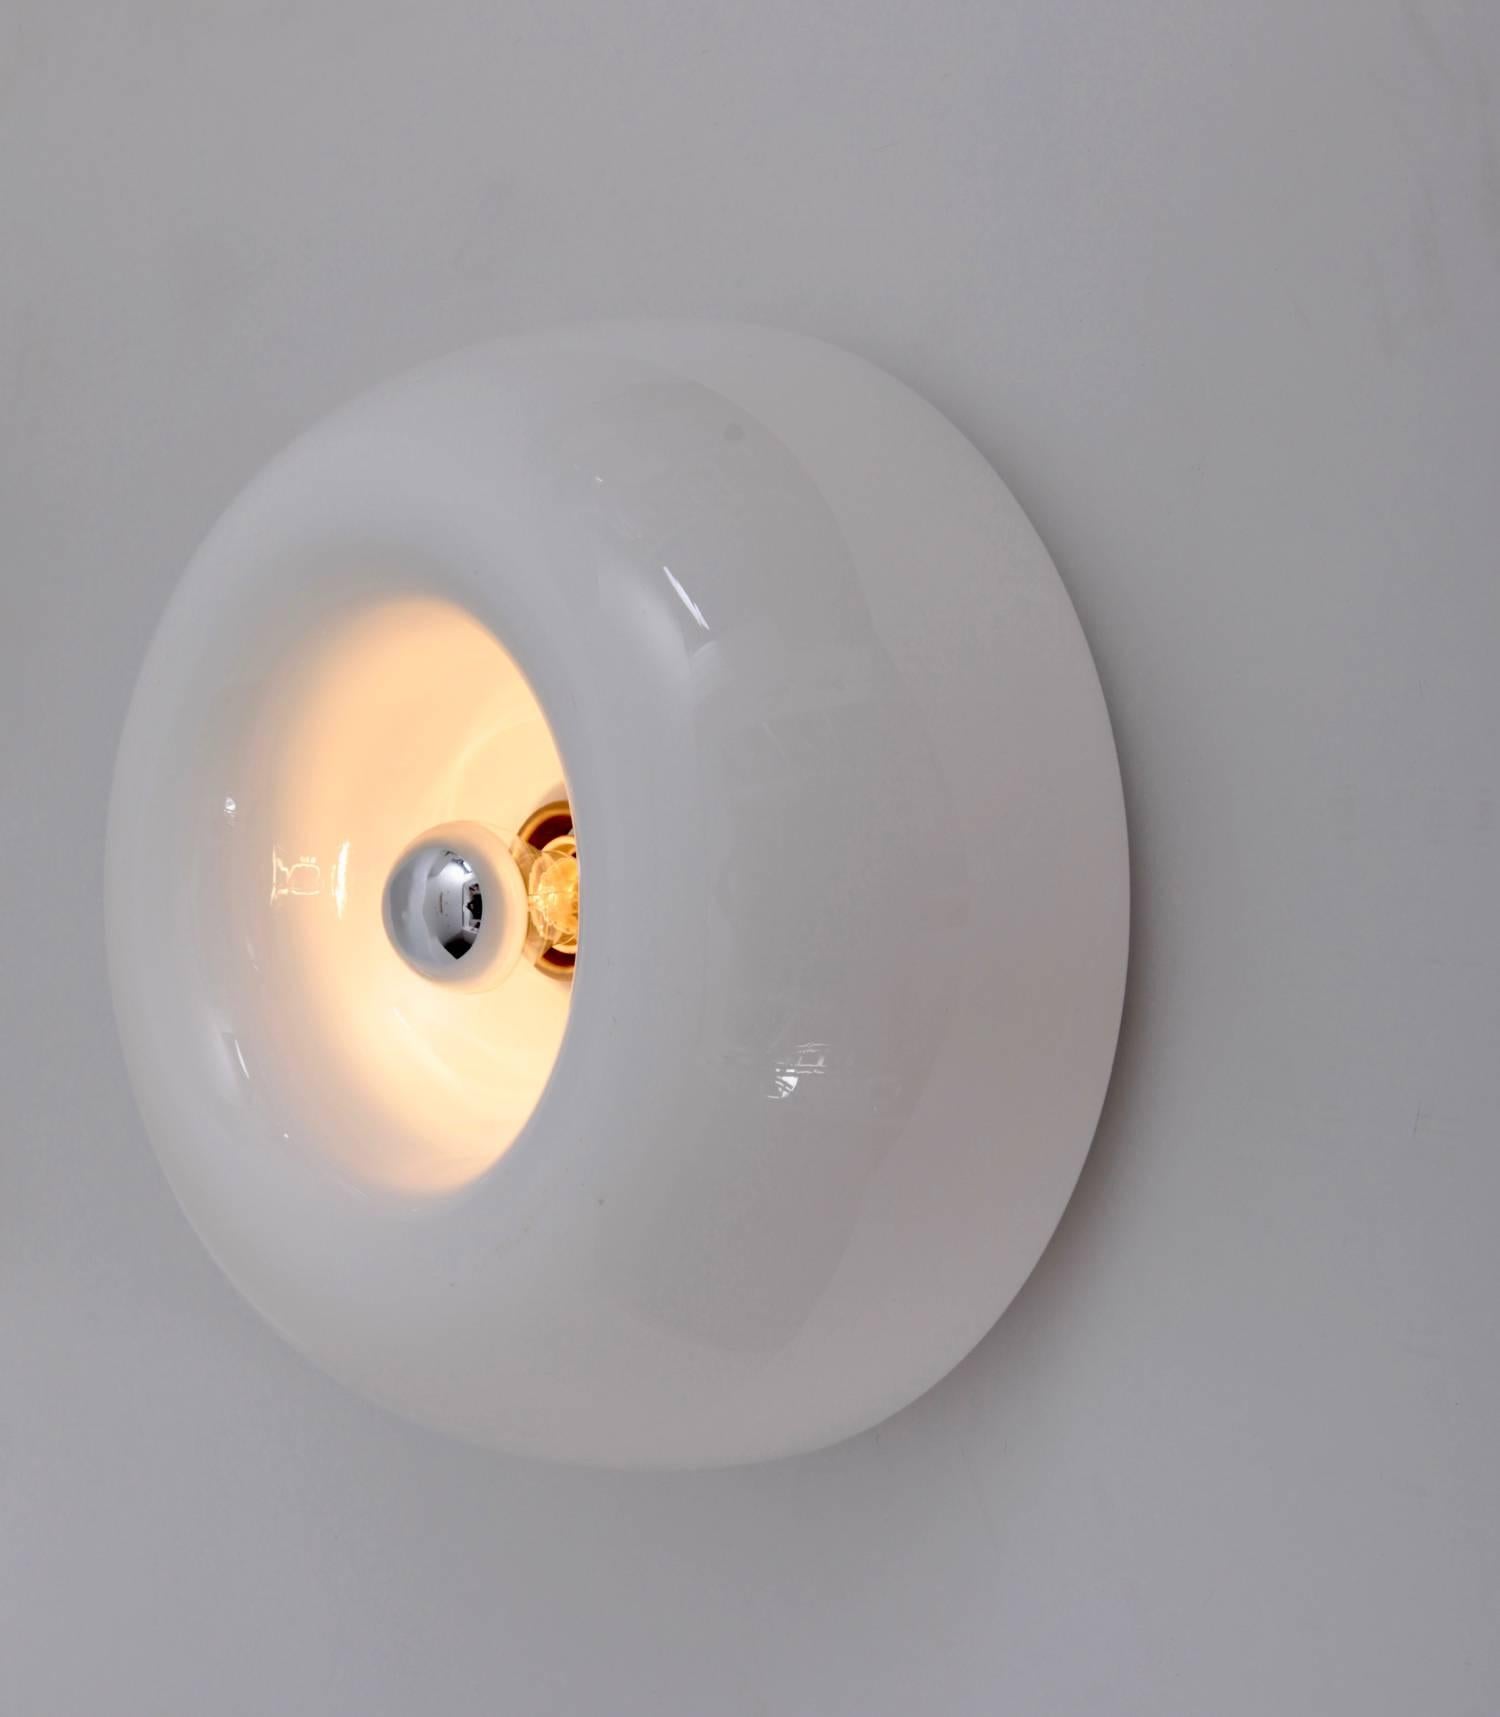 Wall or ceiling opal glass lamp giving diffused light, with or without fluorescent apparatus.

To be on the safe side, the lamp should be checked locally by a specialist concerning local requirements.